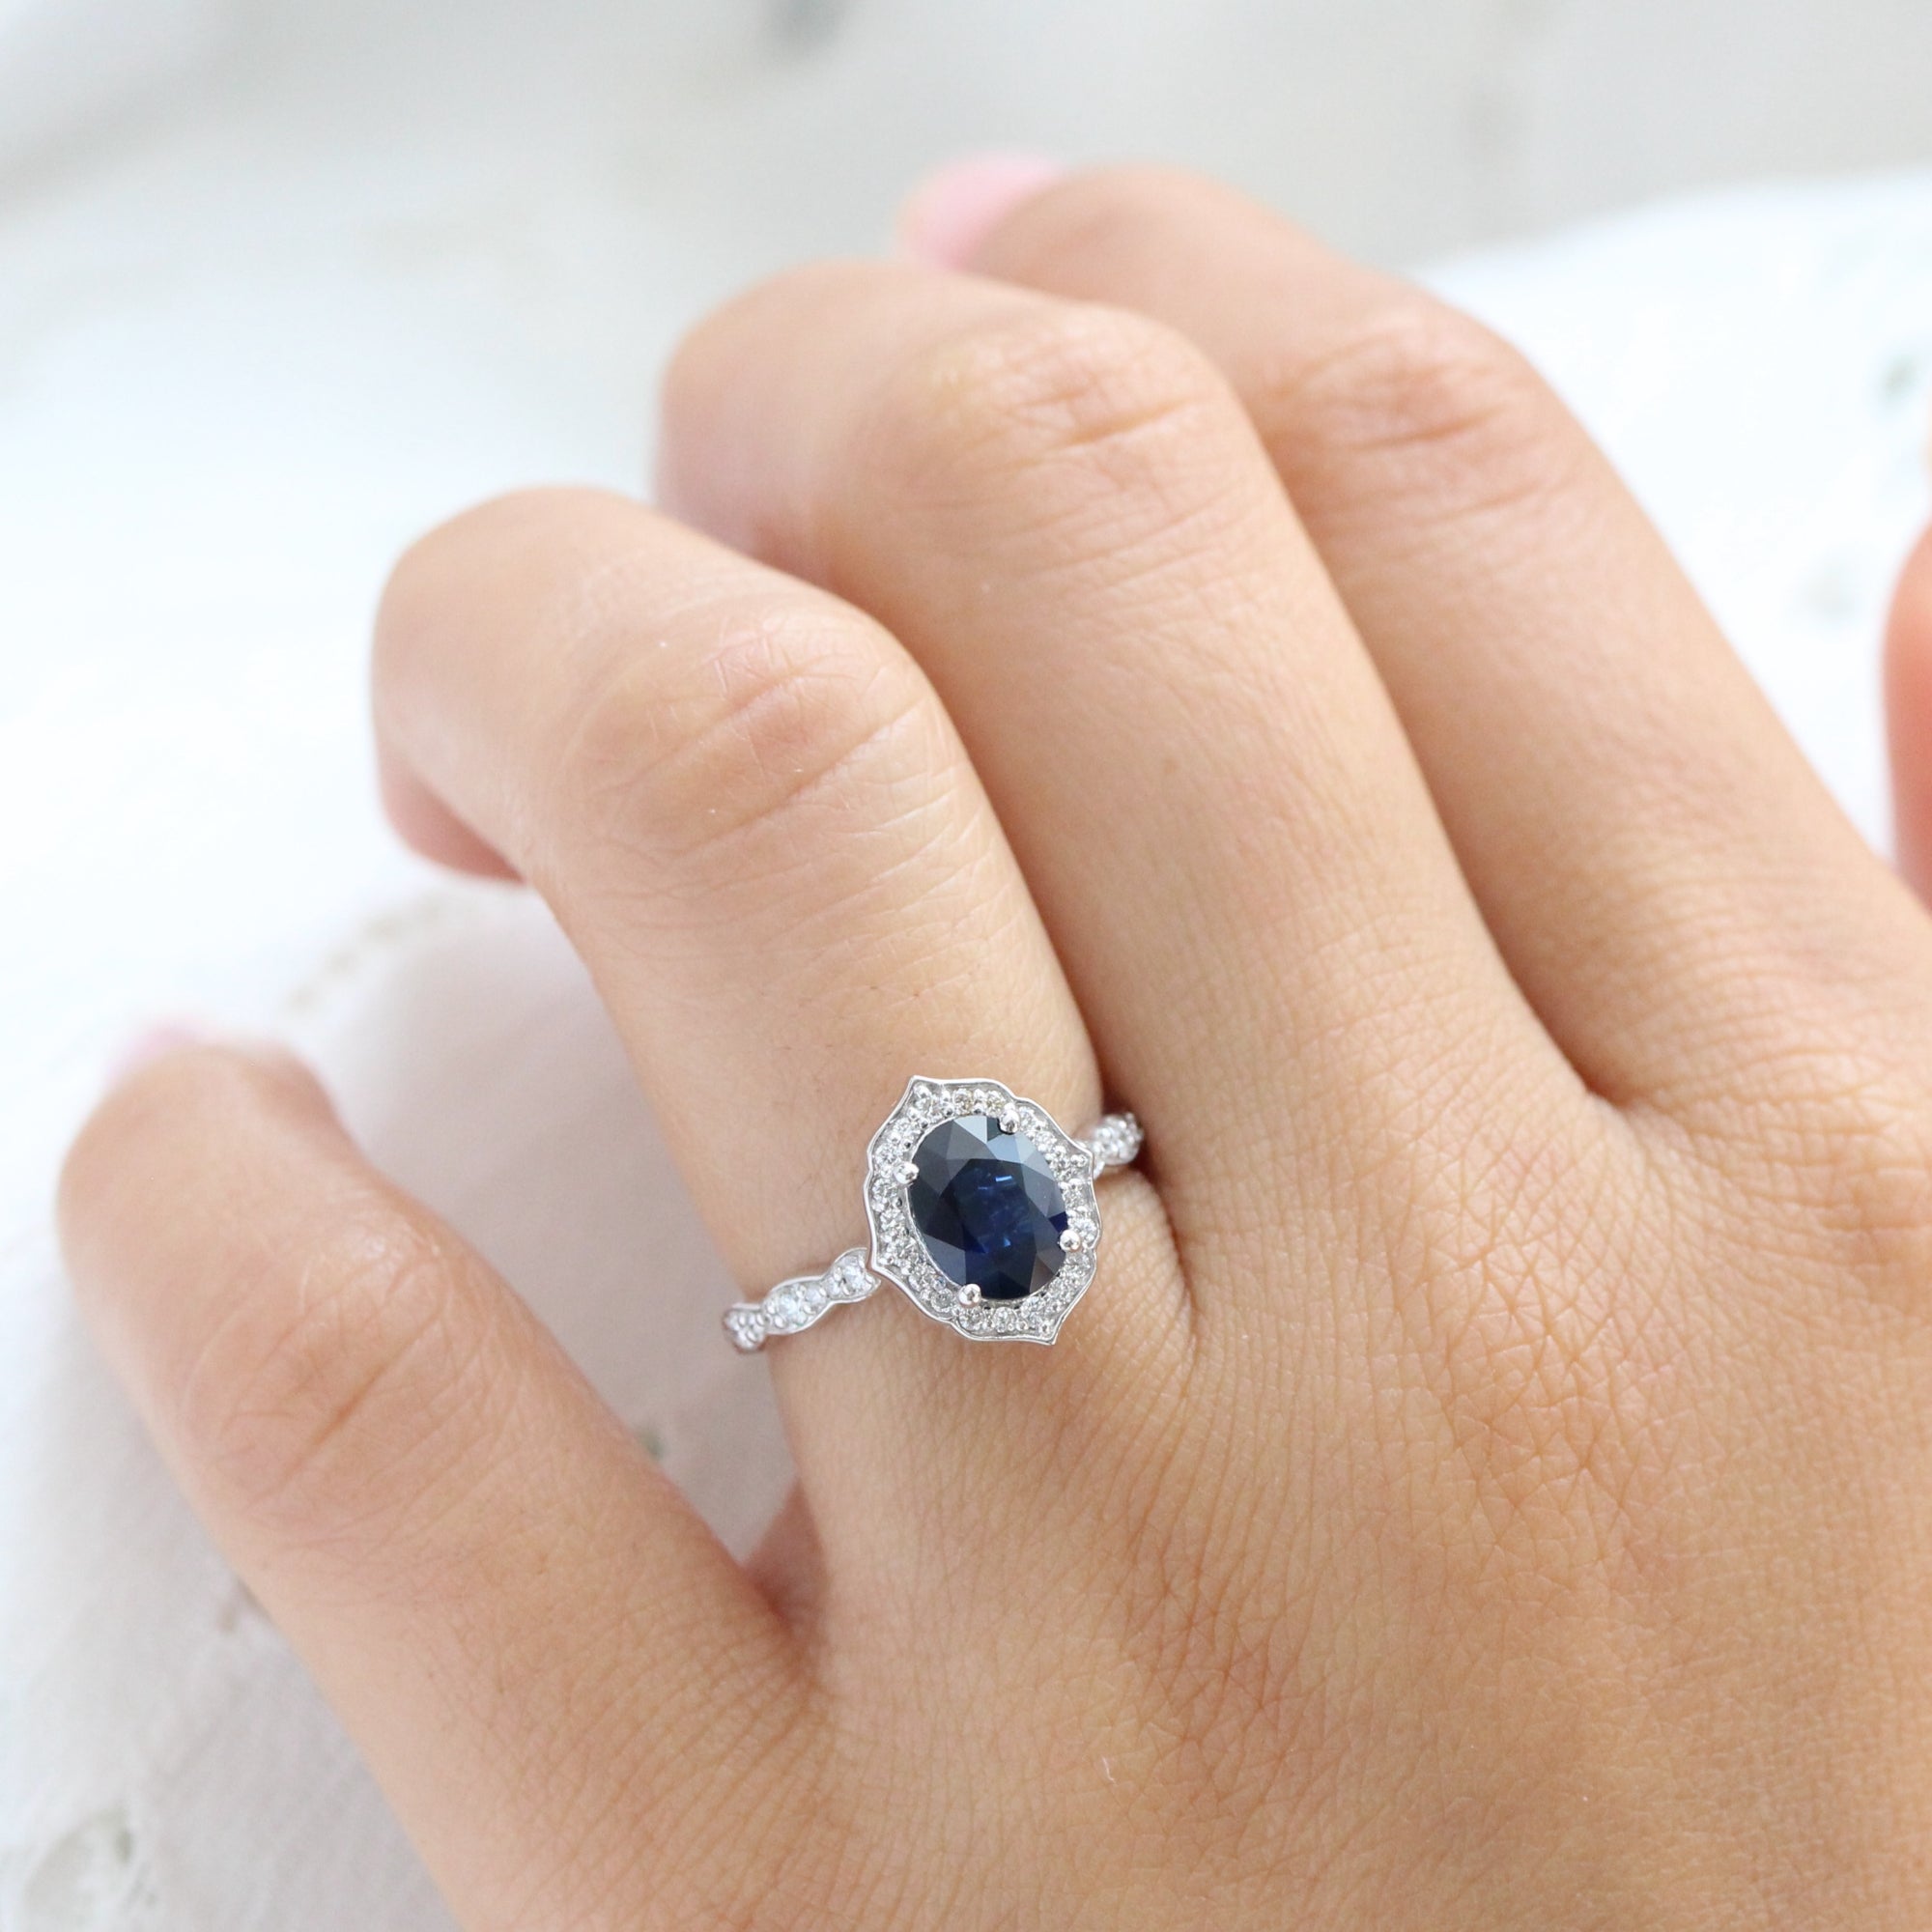 natural blue sapphire engagement ring white gold vintage halo diamond ring la more design jewelry